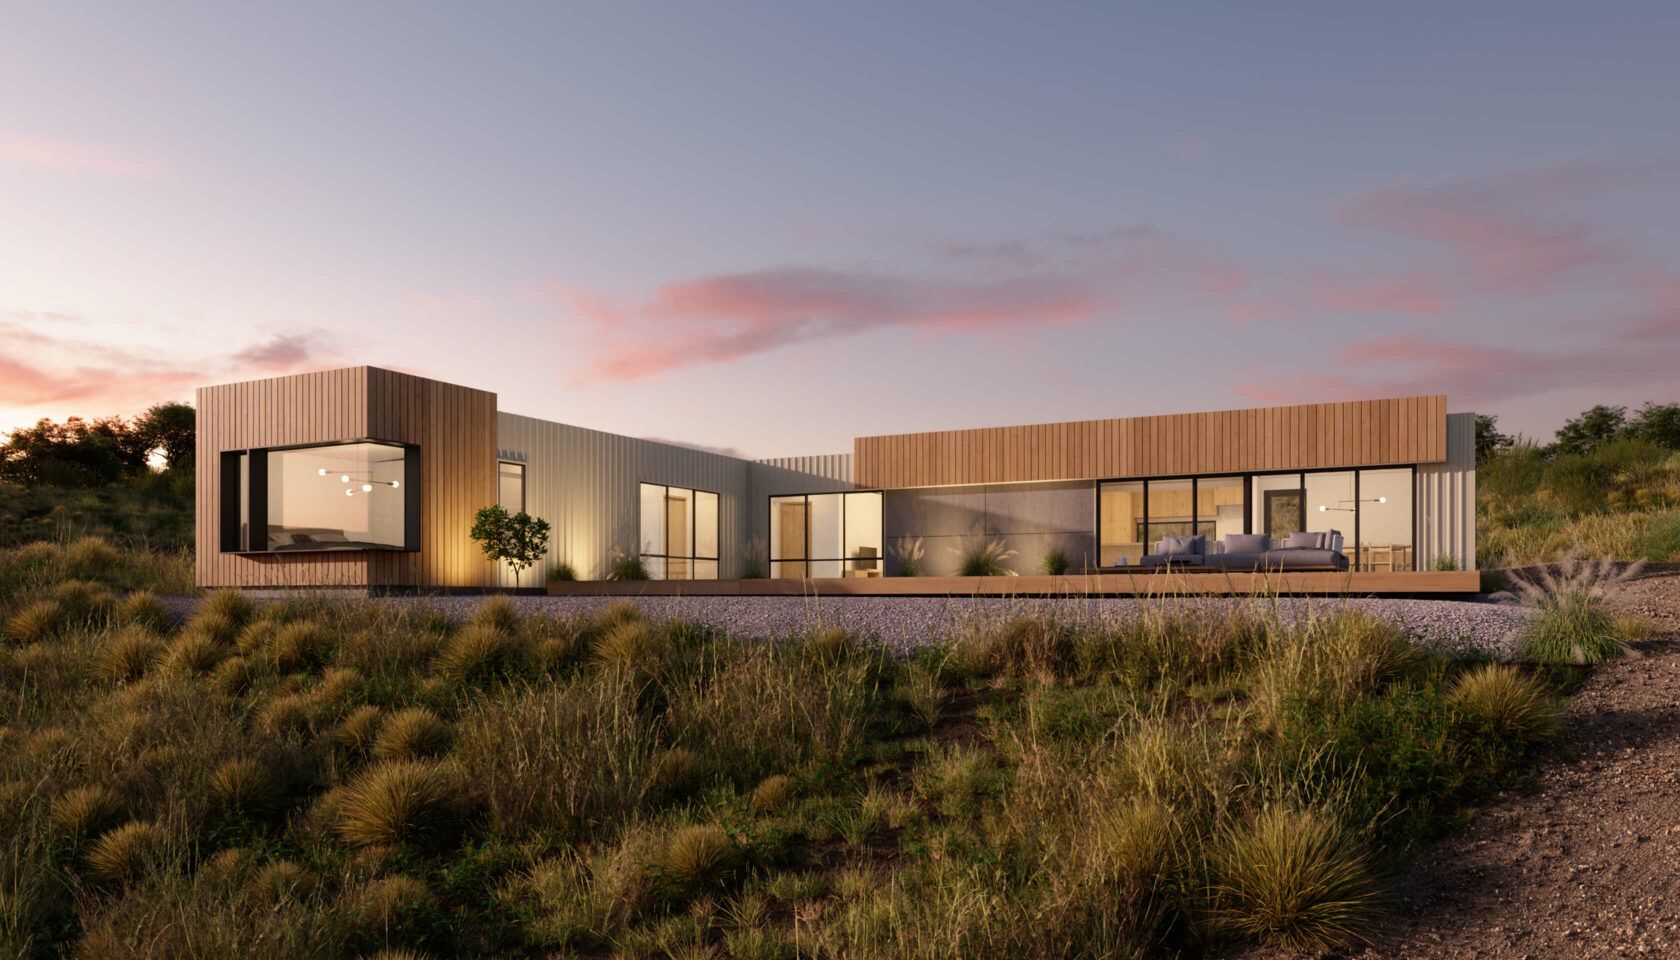 wide shot of pique's free to roam 3 bedroom prefabricated homes at dusk